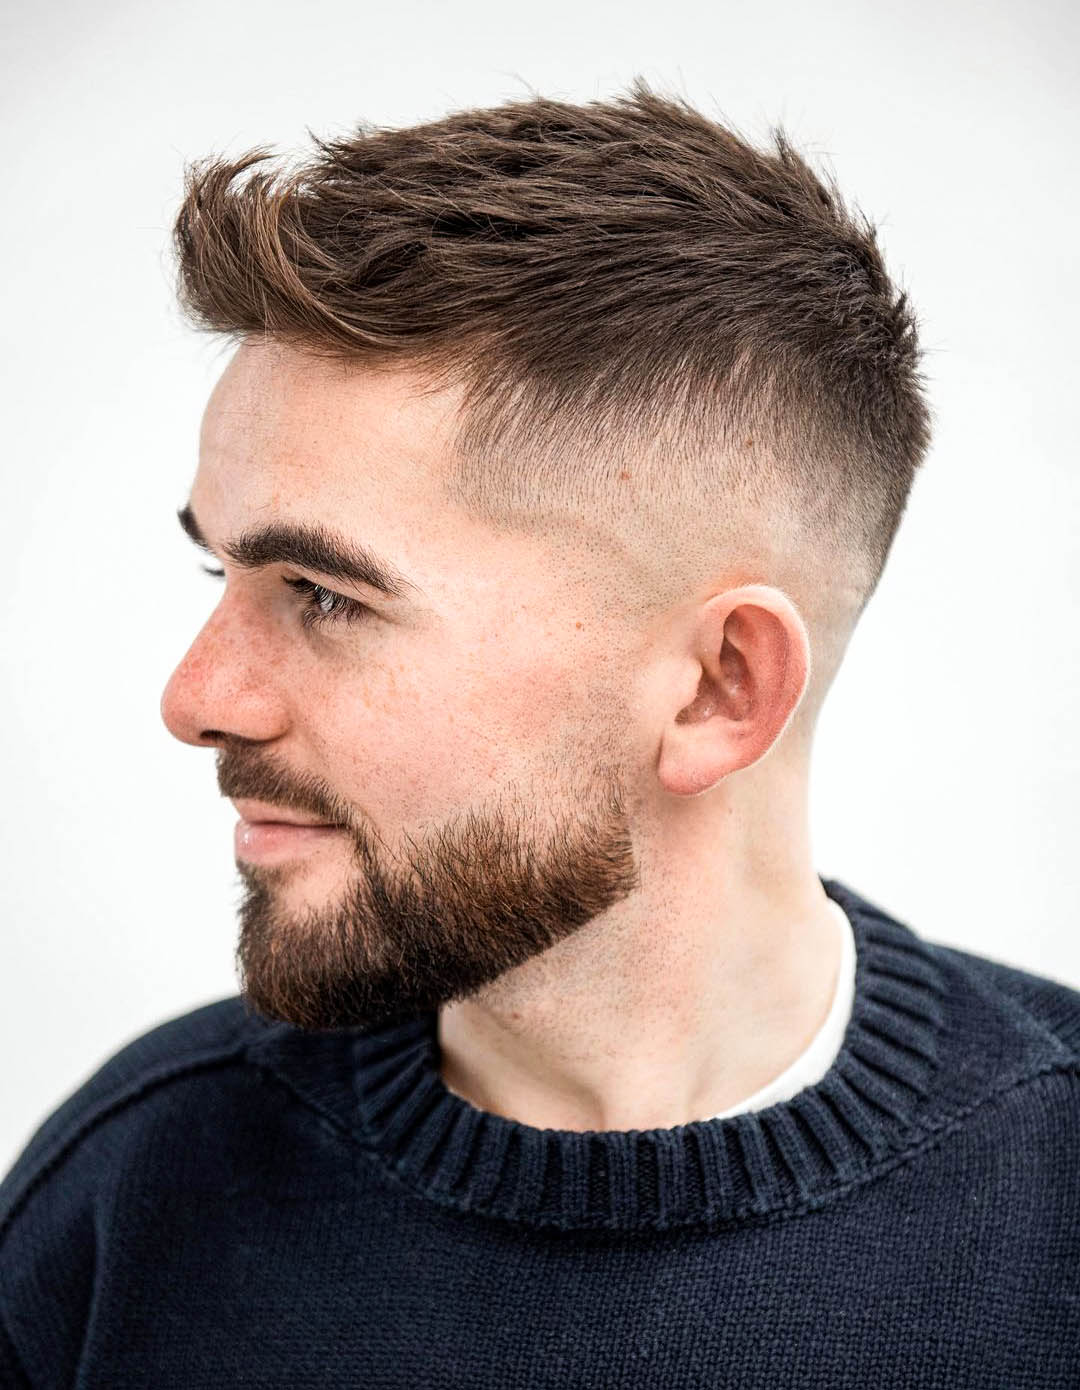 Short hair man 2021: here are 100 trendy cuts